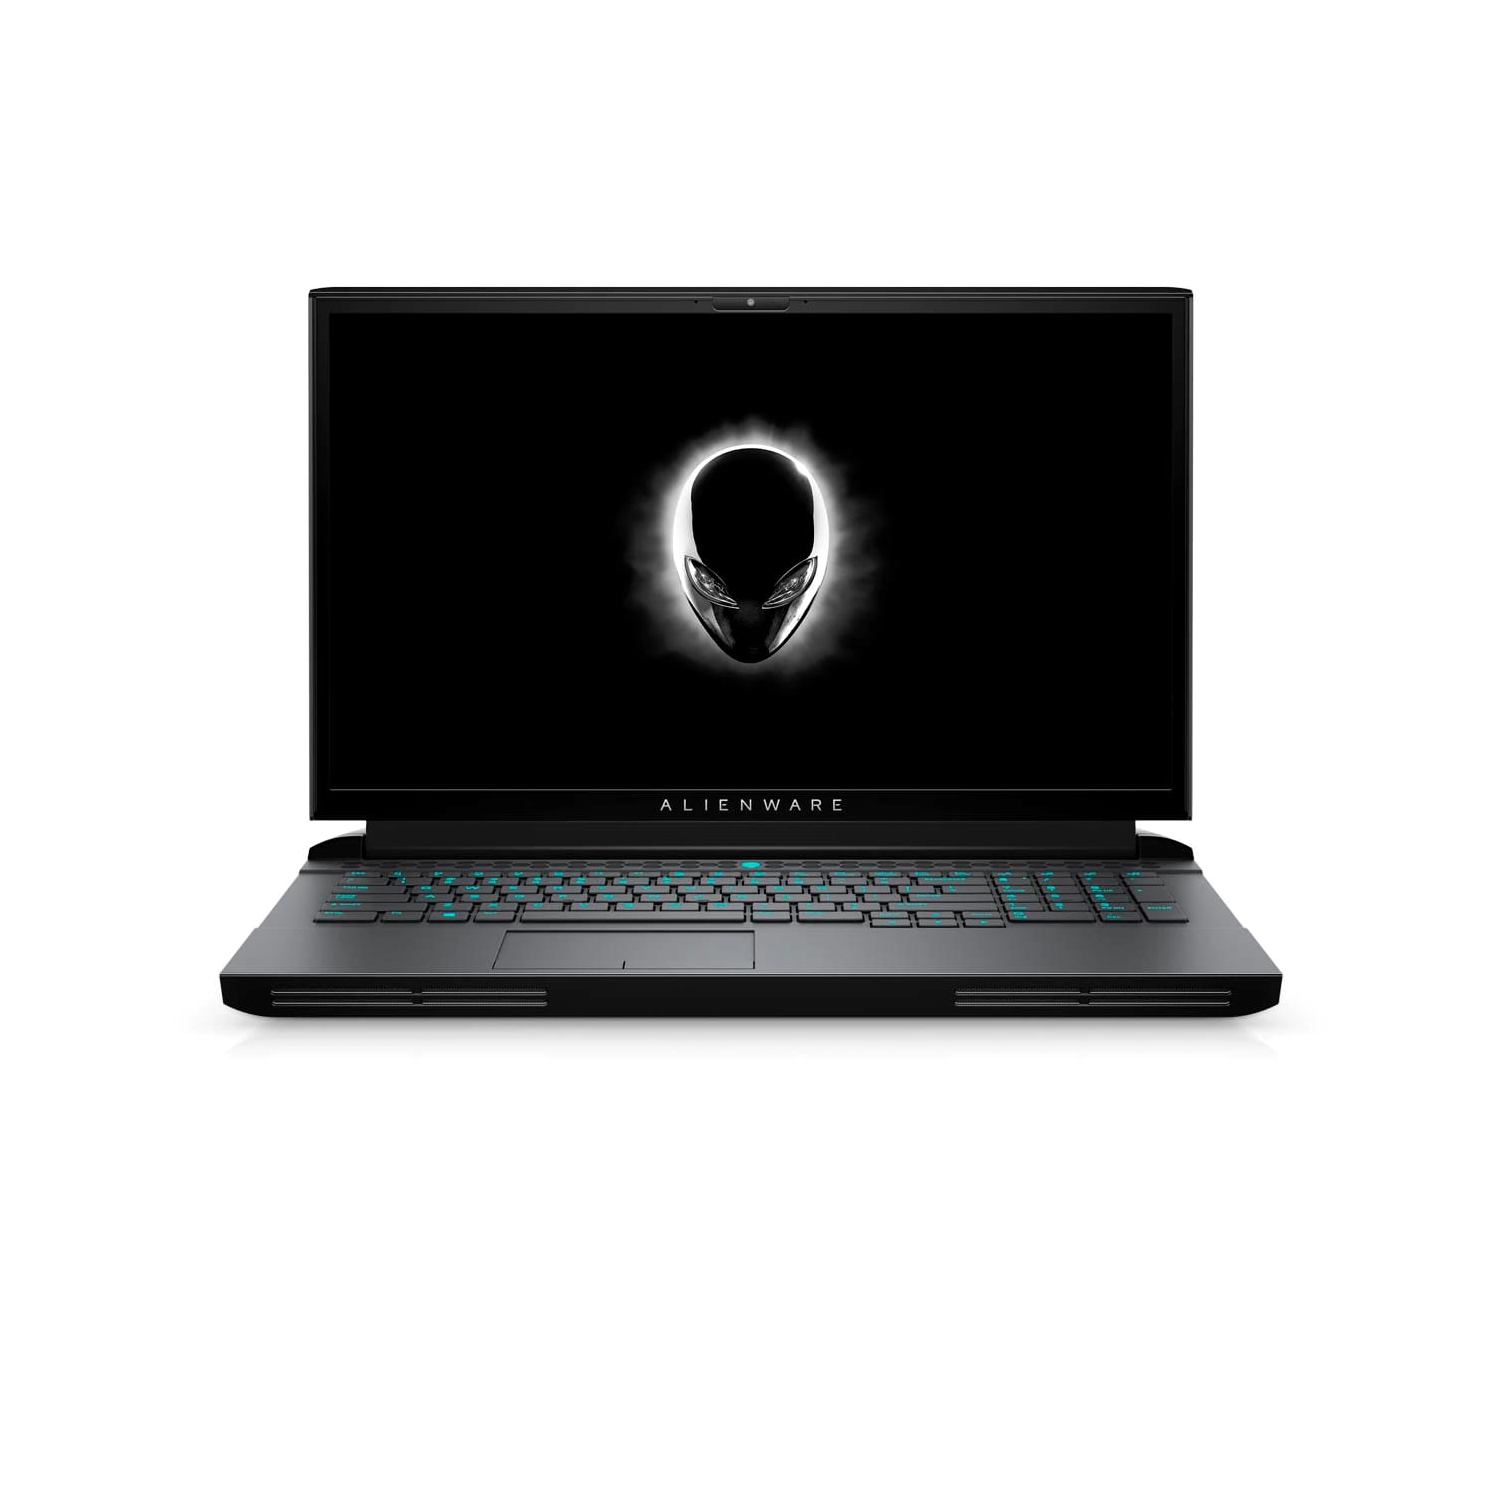 Refurbished (Excellent) - Dell Alienware 17 51m R2 Gaming Laptop (2020), 17.3" FHD, Core i7 - 1TB SSD + 1TB HDD - 16GB RAM - 2070 Super, 4.8 GHz - 10th Gen CPU Certified